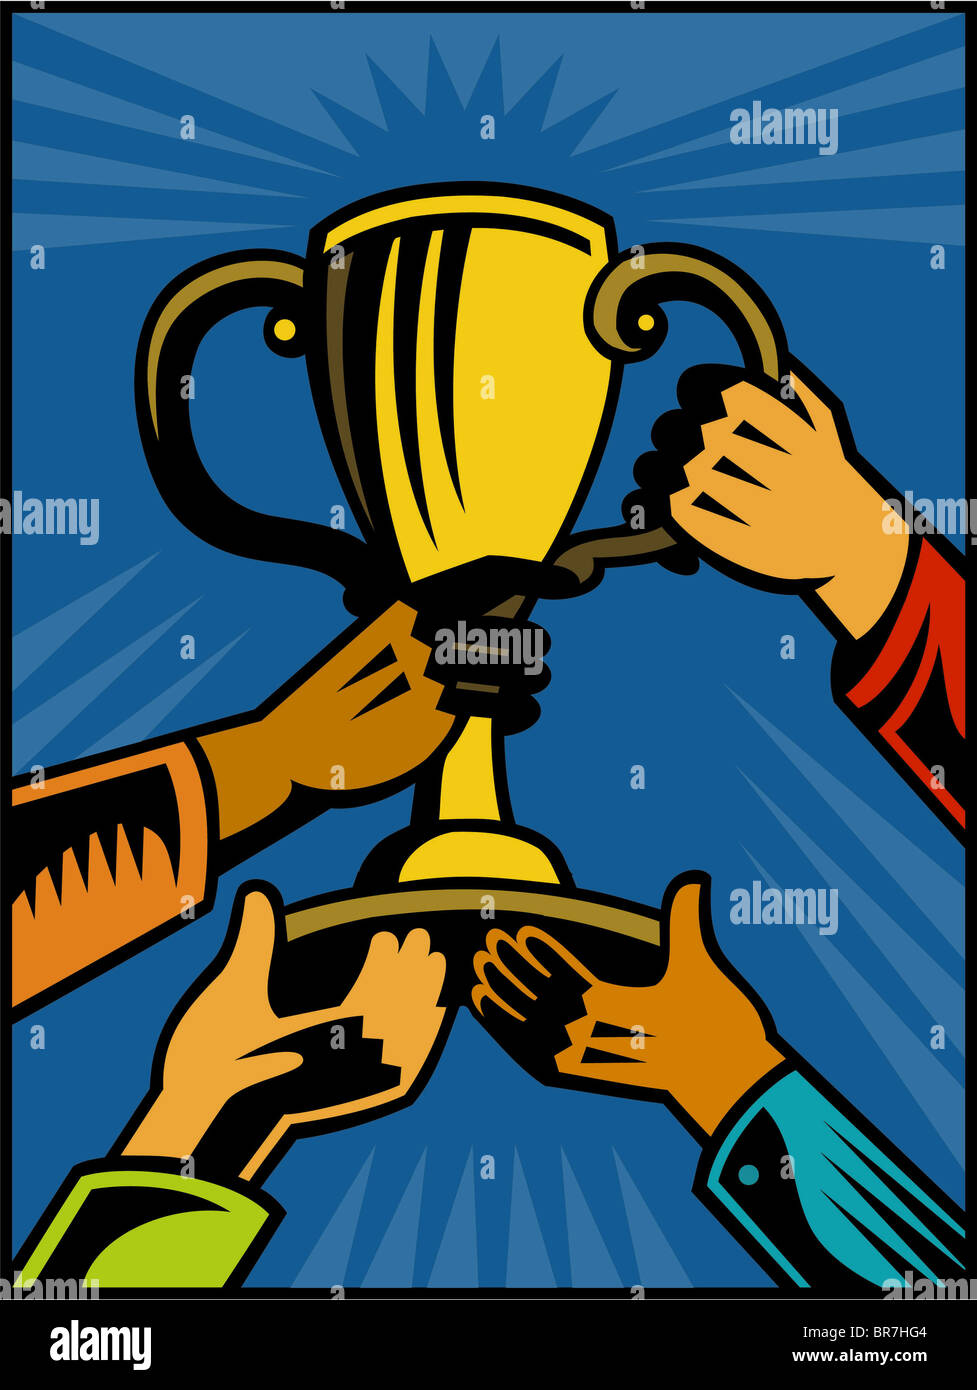 Hands holding up a trophy Stock Photo